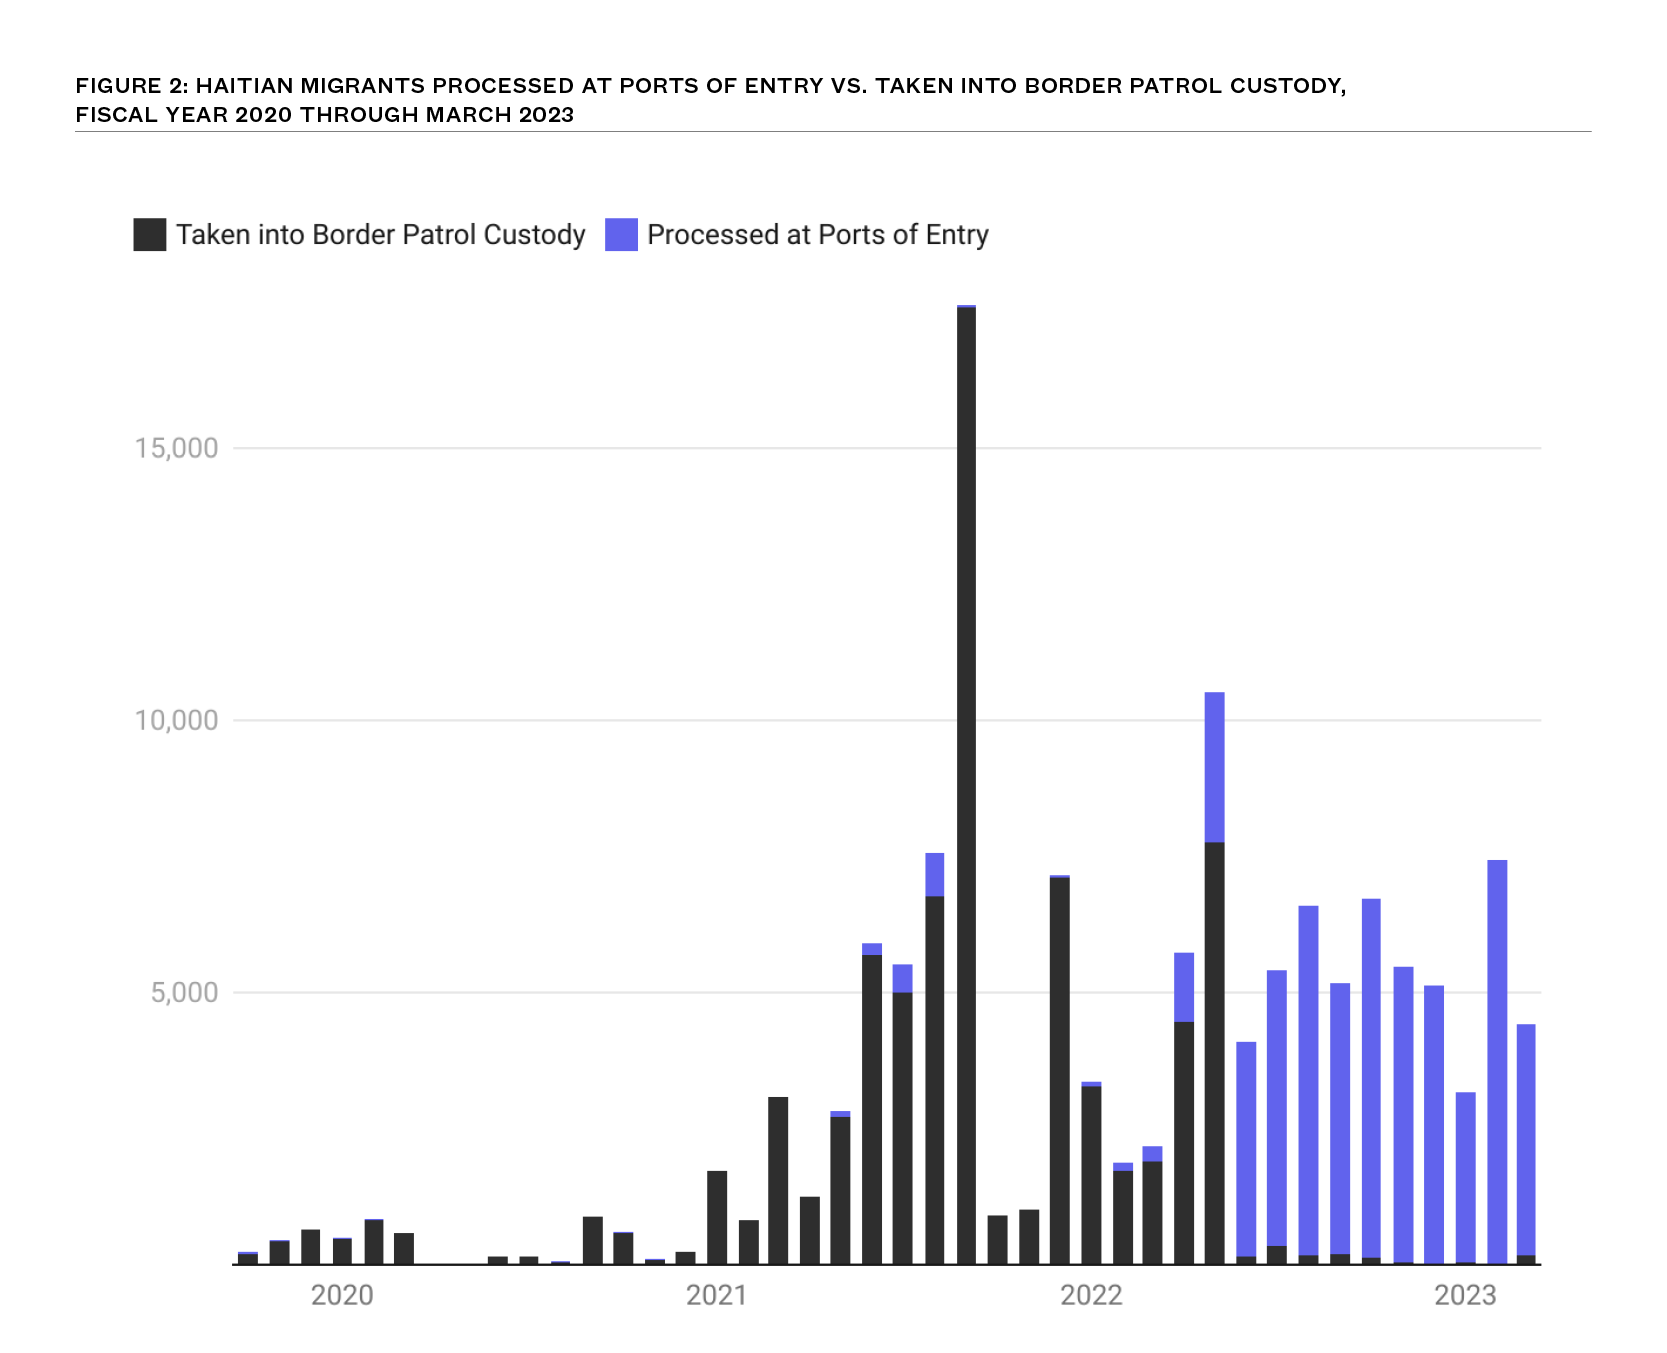 A stacked bar chart showing Haitian migrants processed at ports of entry versus those taken into border patrol custody with a sharp clean from May 2022 to February 2023